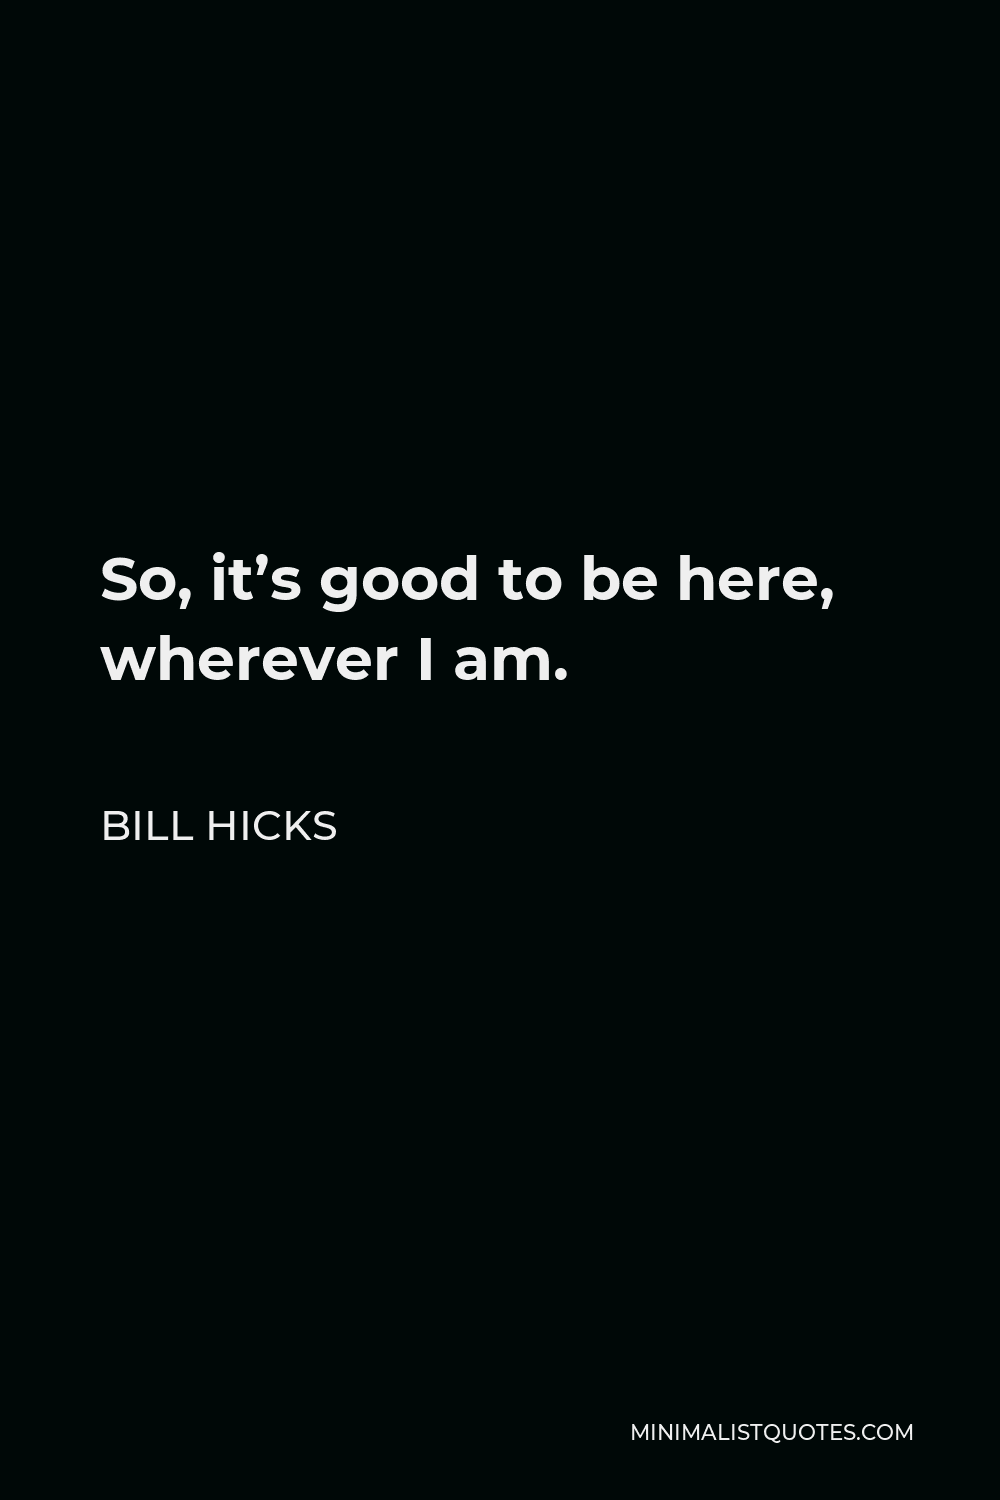 Bill Hicks Quote - So, it’s good to be here, wherever I am.